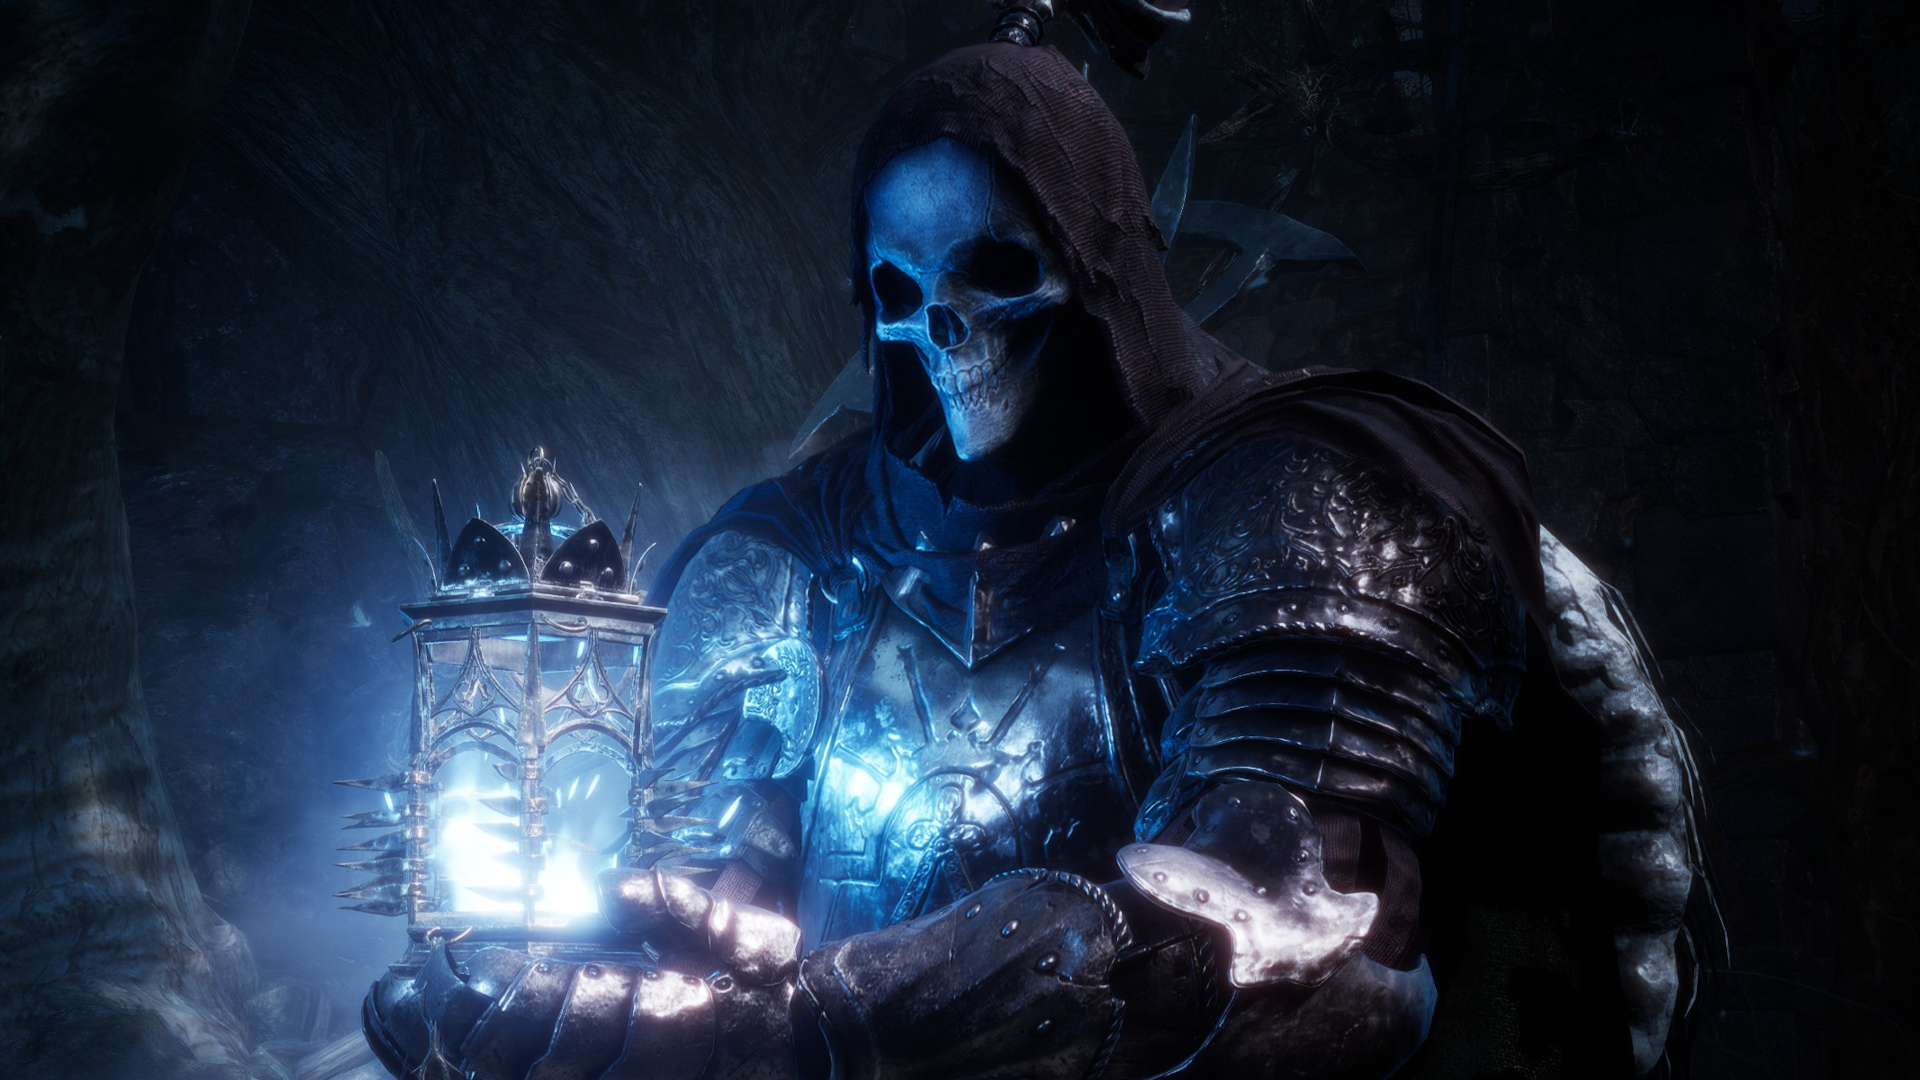 LORDS OF THE FALLEN on X: Greetings Lampbearers! A pivotal choice lies  before you, one that ties your allegiance to one of two factions, Rhogar or  Umbral. But choose wisely live tomorrow